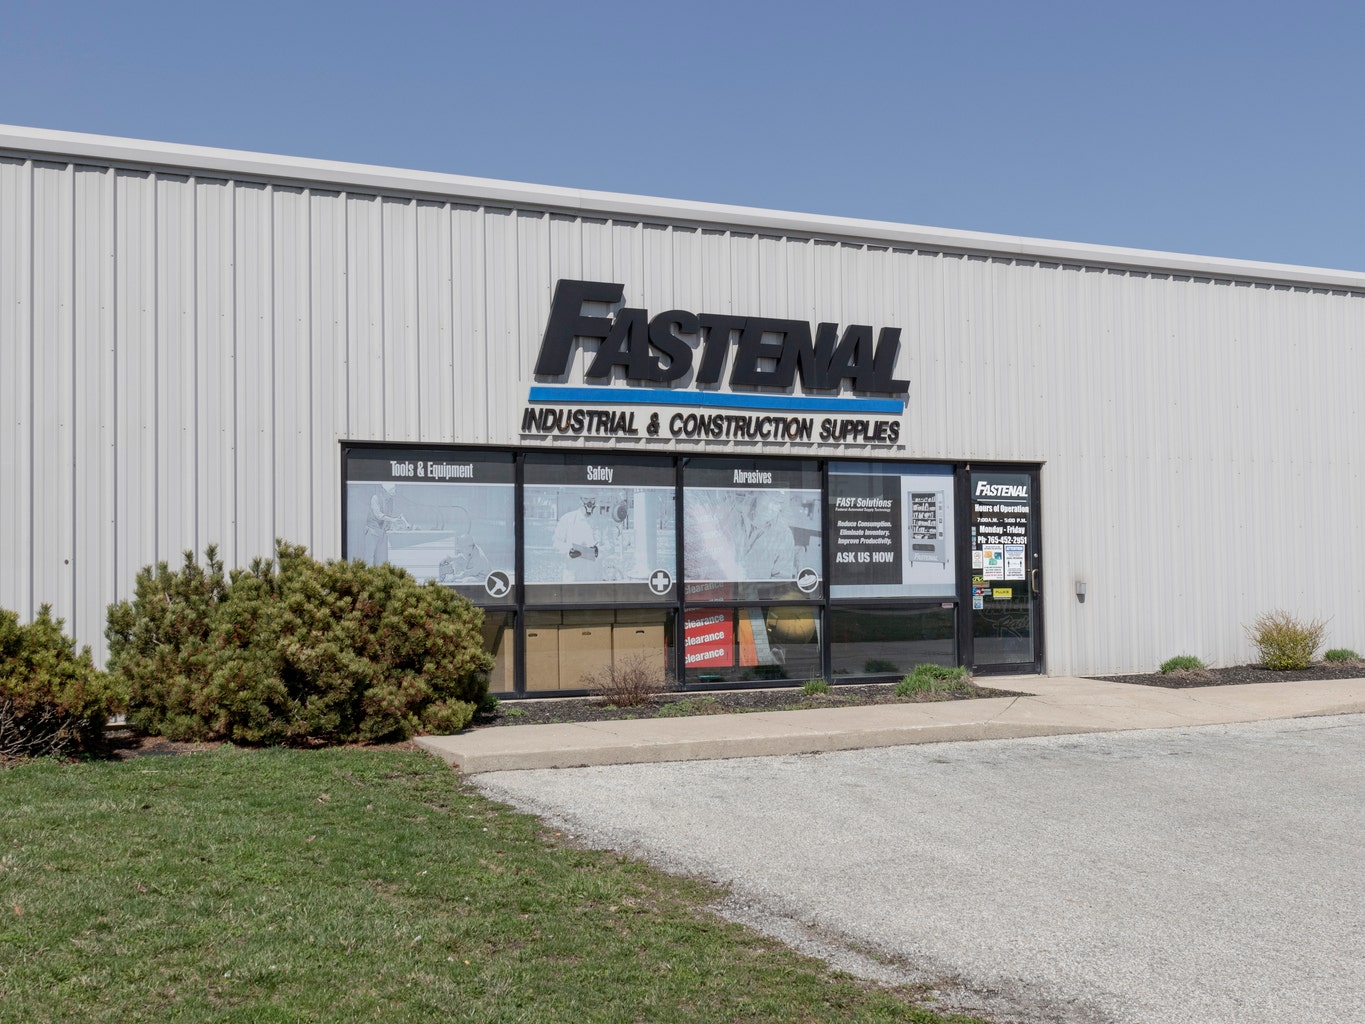 Fastenal Company - Today's heightened (or higher) risk work